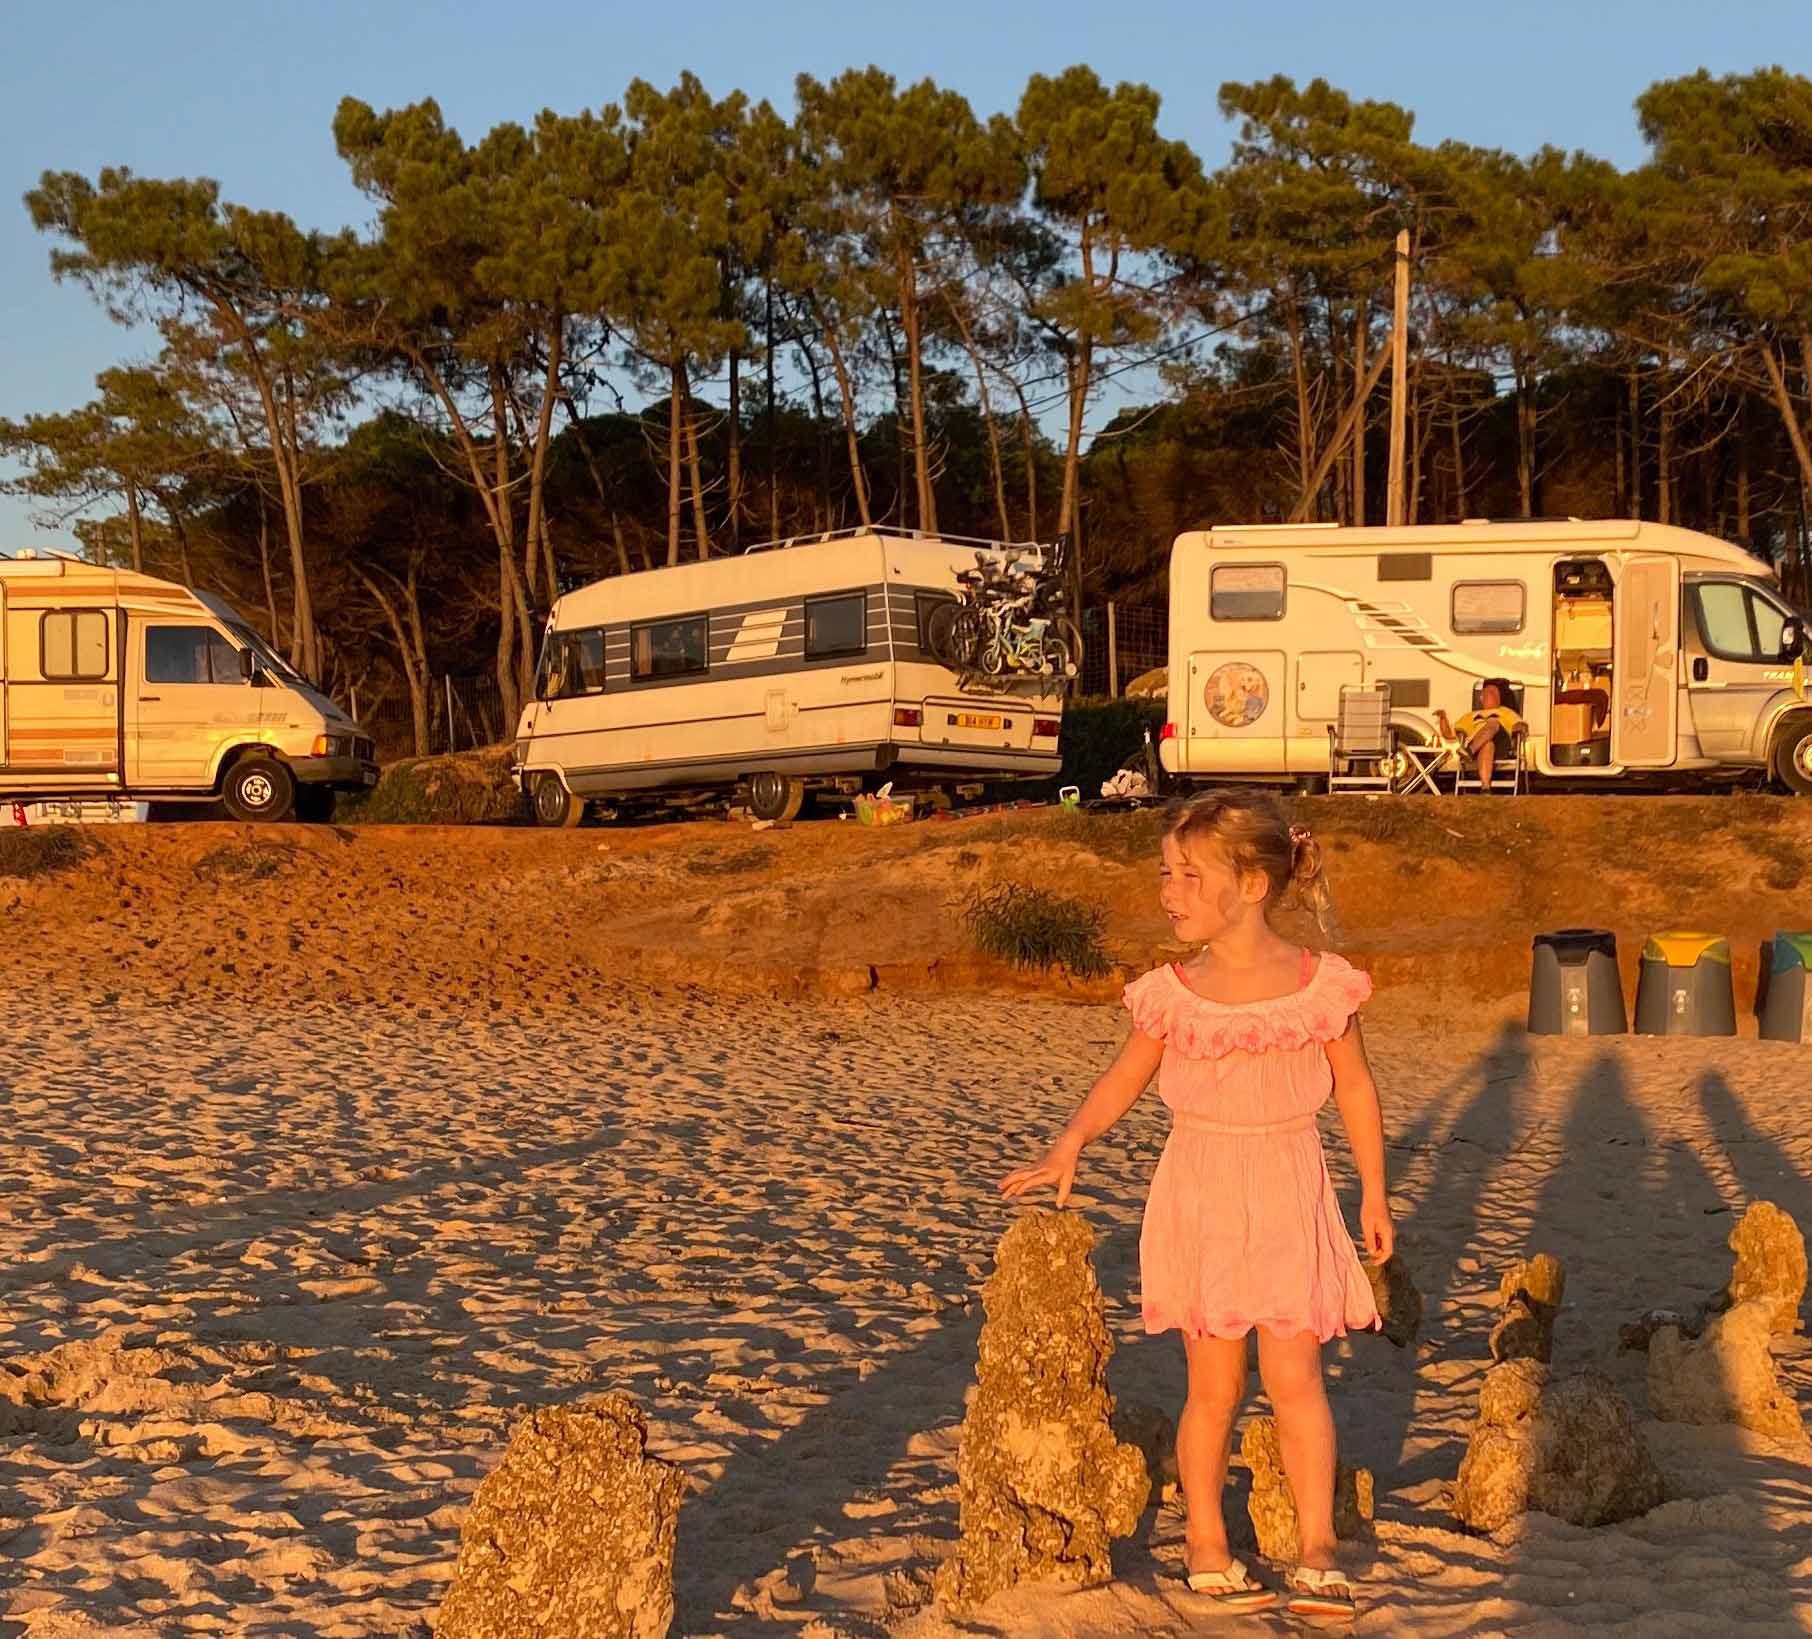 Girl stood on a sandy beach with motorhomes parked behind